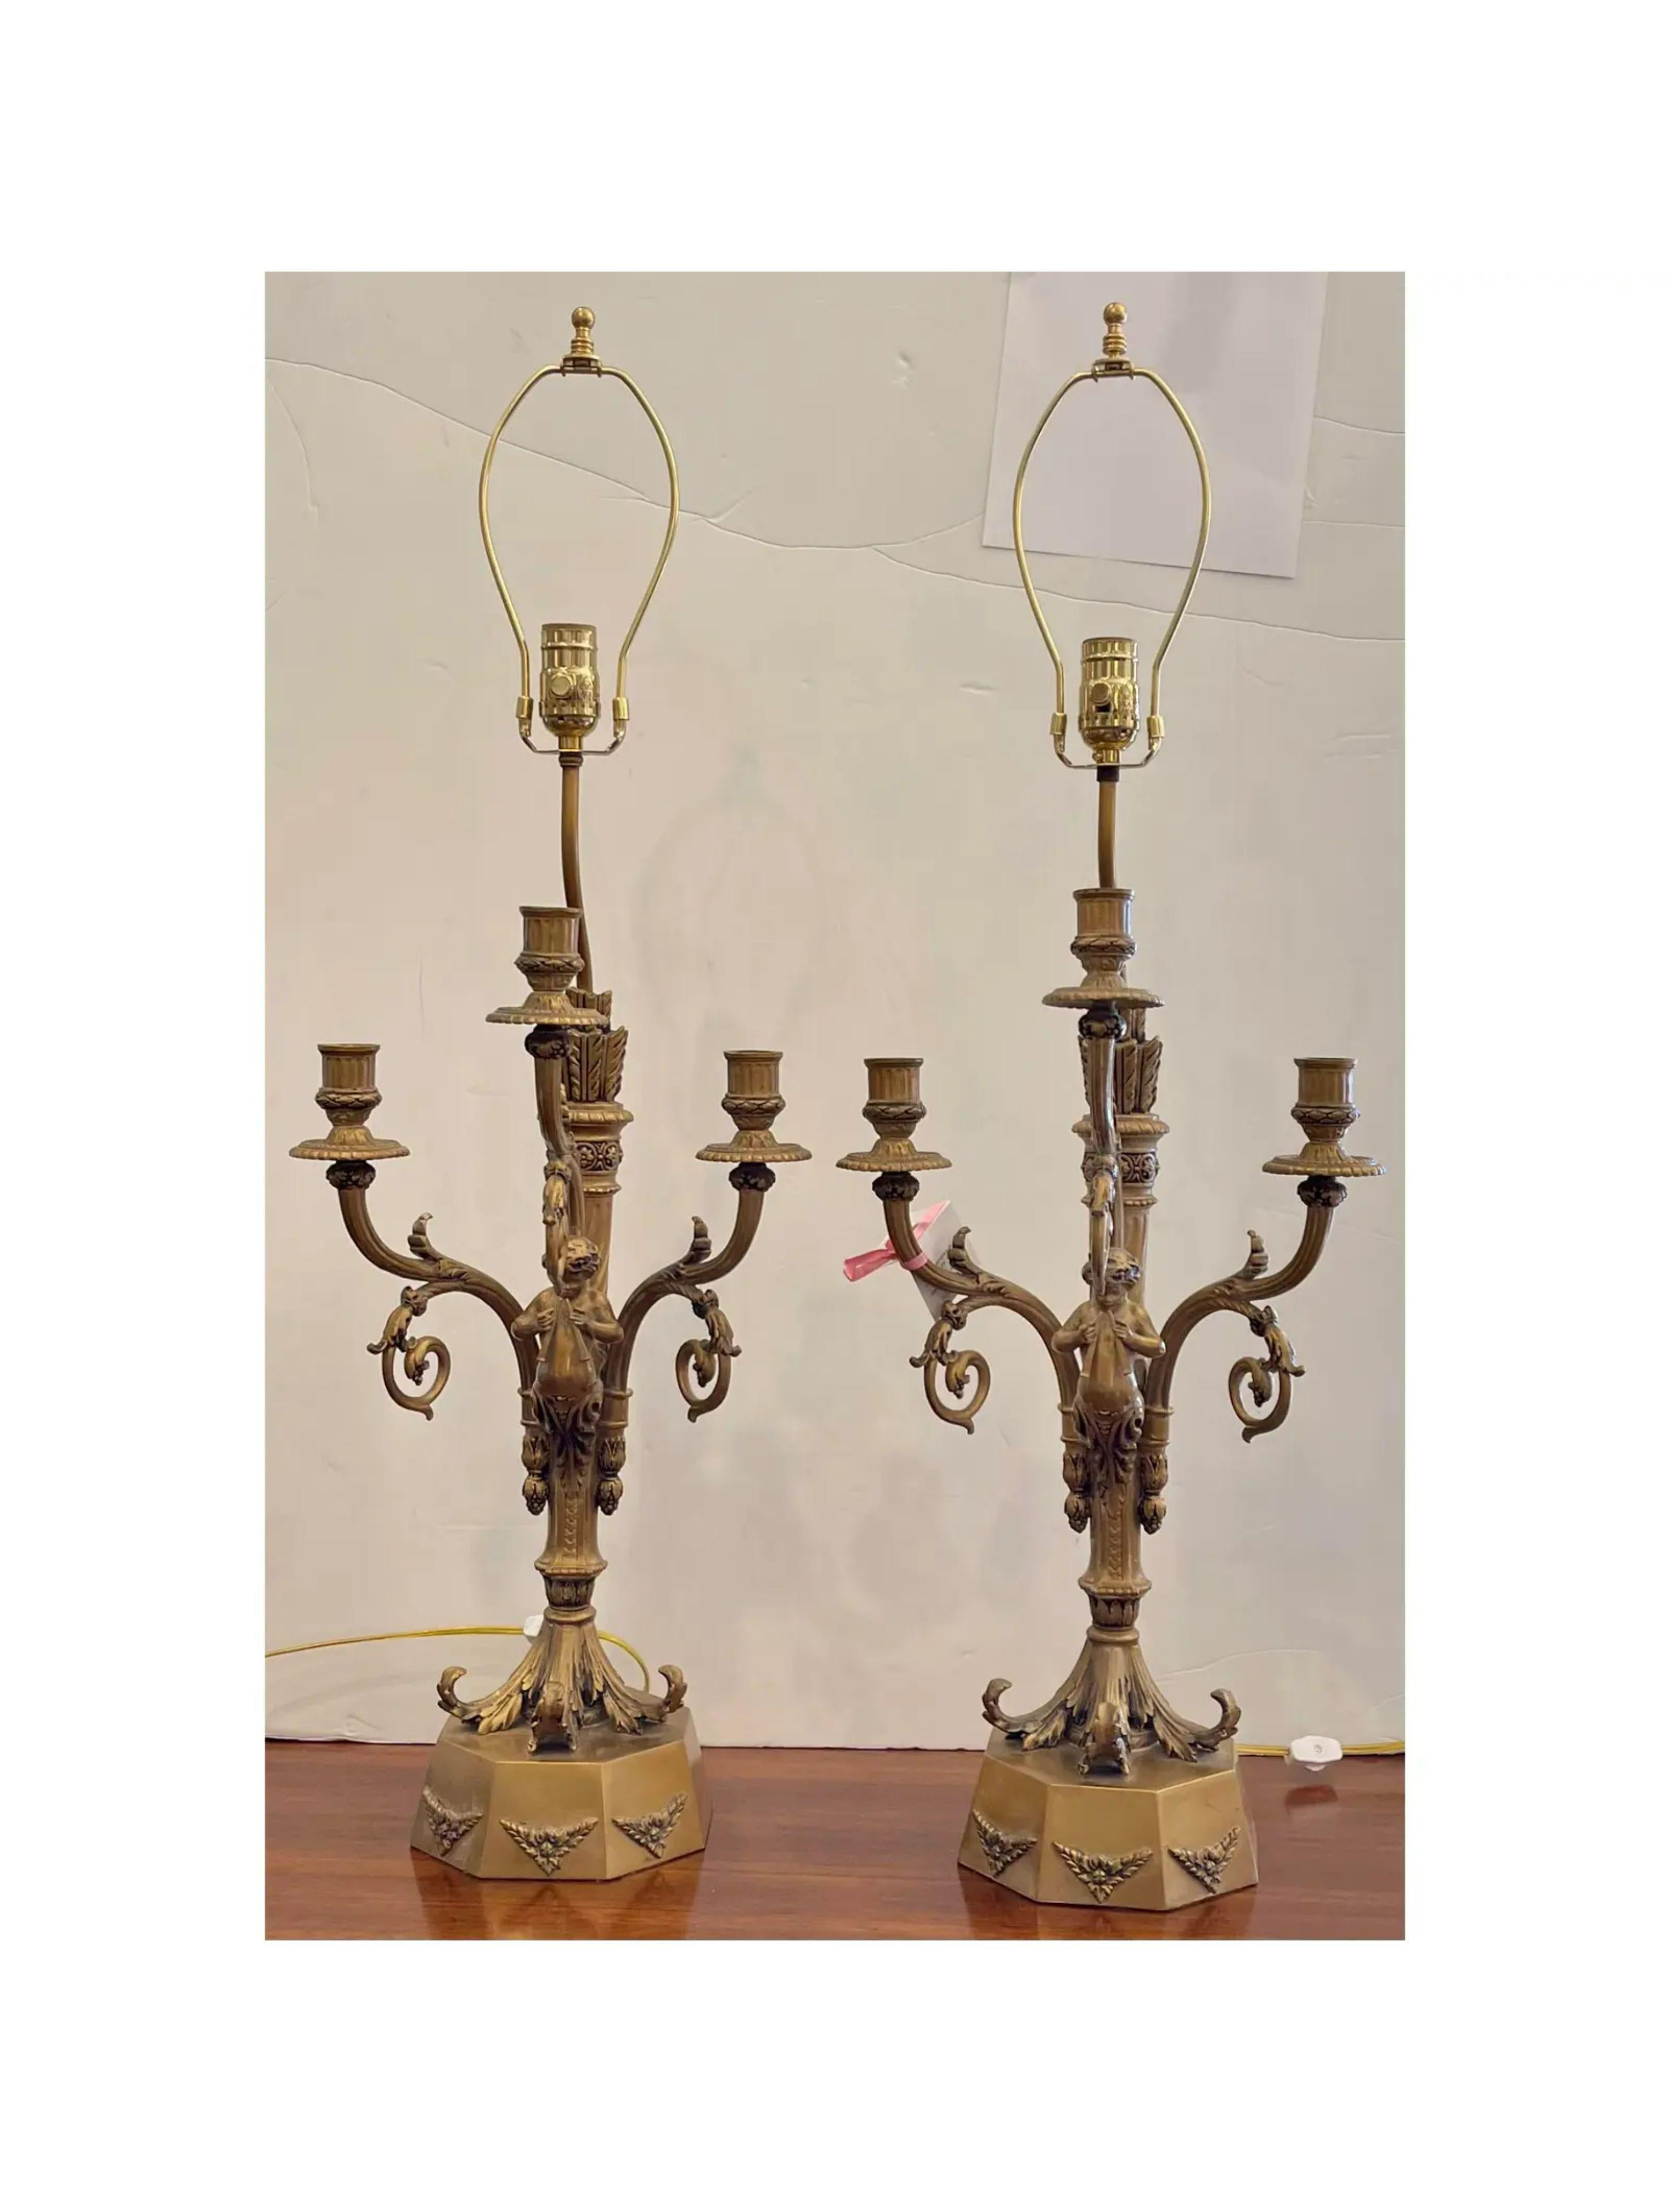 Pair of Hollywood Regency Candelabra Lamps w Trumpet Playing Putti - Paris Foundry. Superb quality painted metal finish, each featuring a Paris makers foundry mark which is illustrated.

Additional information: 
Materials: Bronze, Paint
Color: